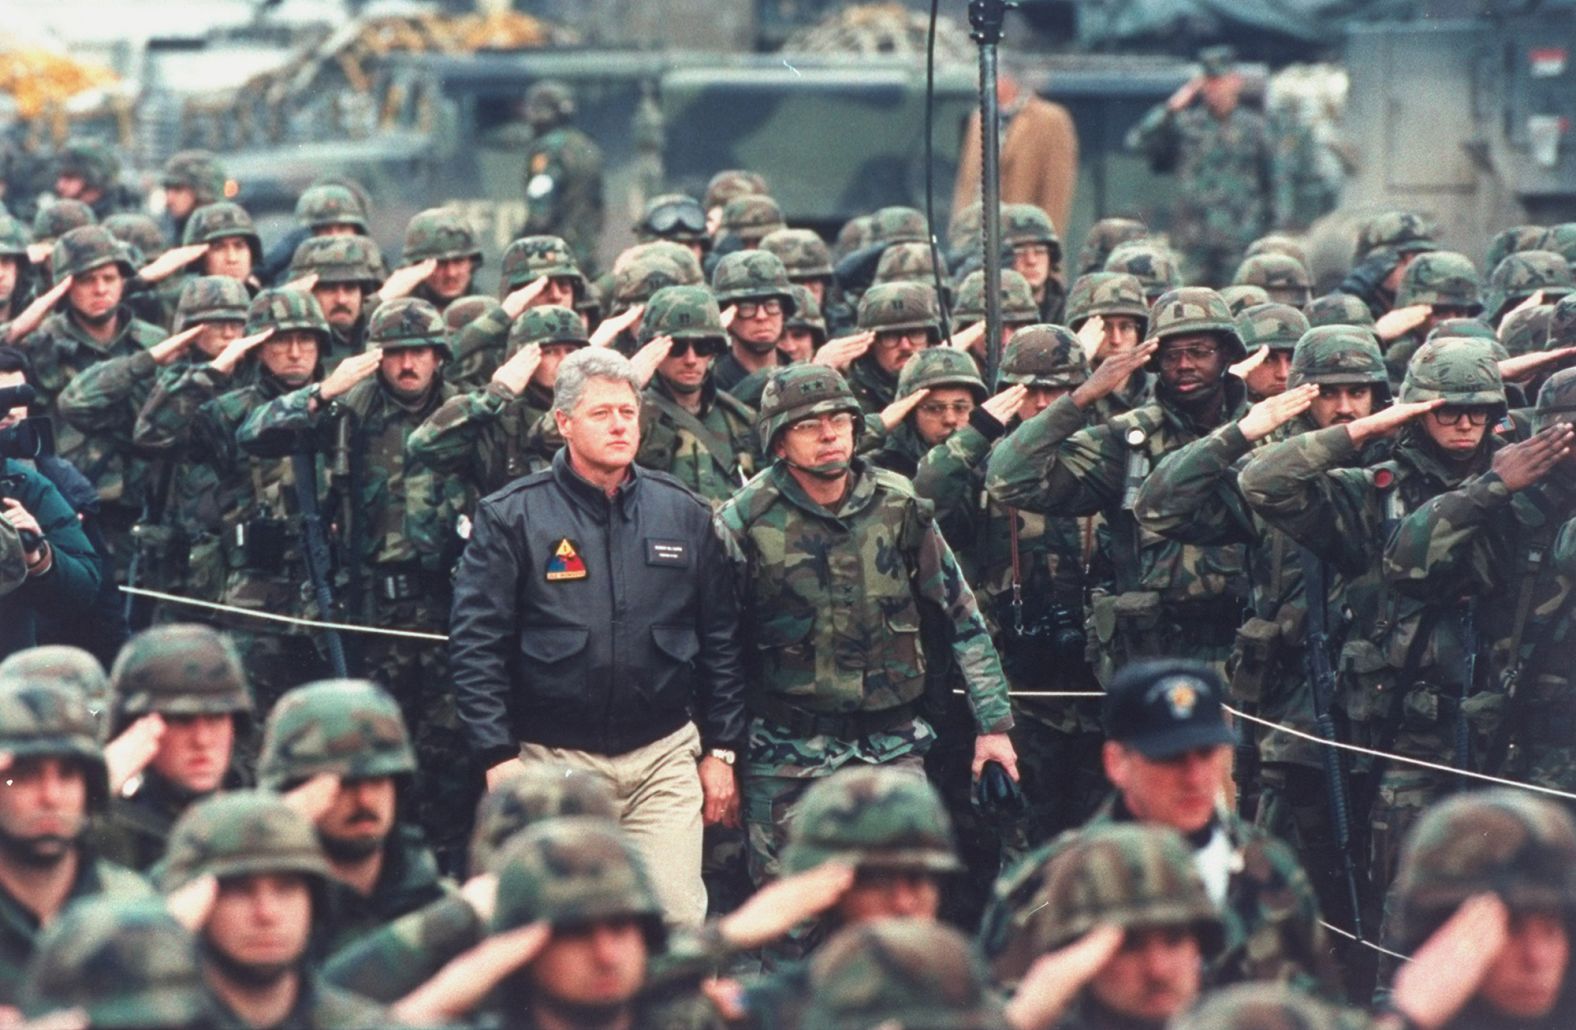 In January 1996, US troops salute President Bill Clinton in Bosnia and Herzegovina. US forces were there as part of peacekeeping efforts in the former Yugoslavia.